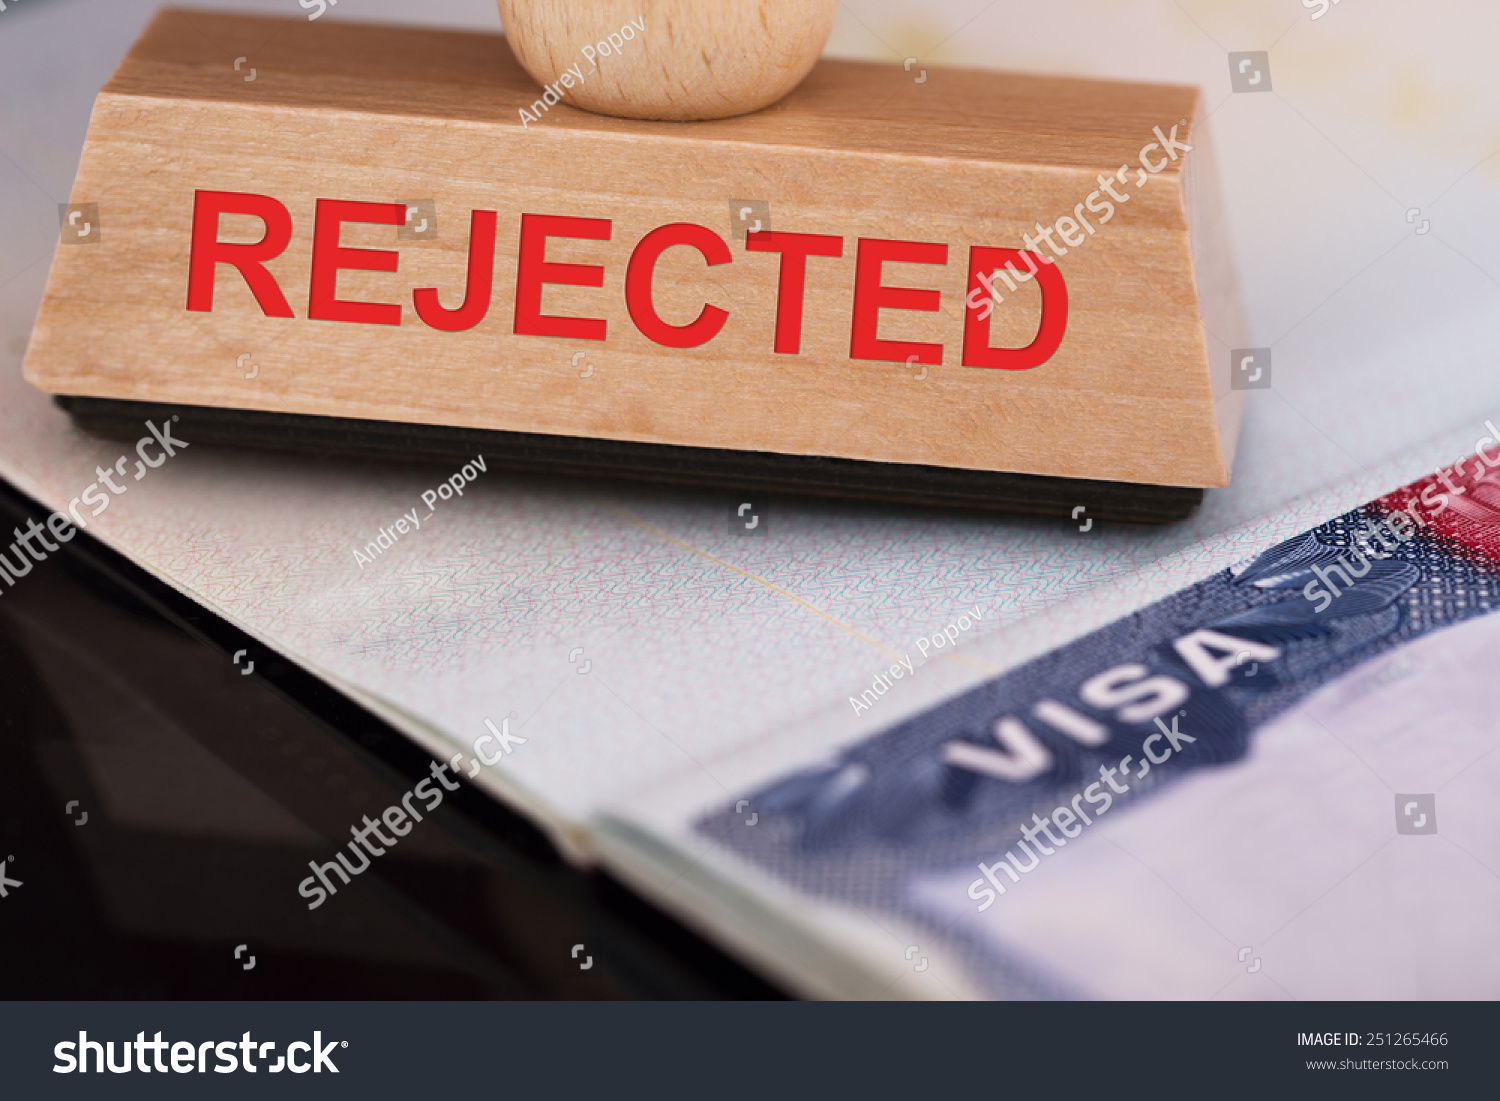 Close-up Photo Of Rejected Stamp On Visa #251265466